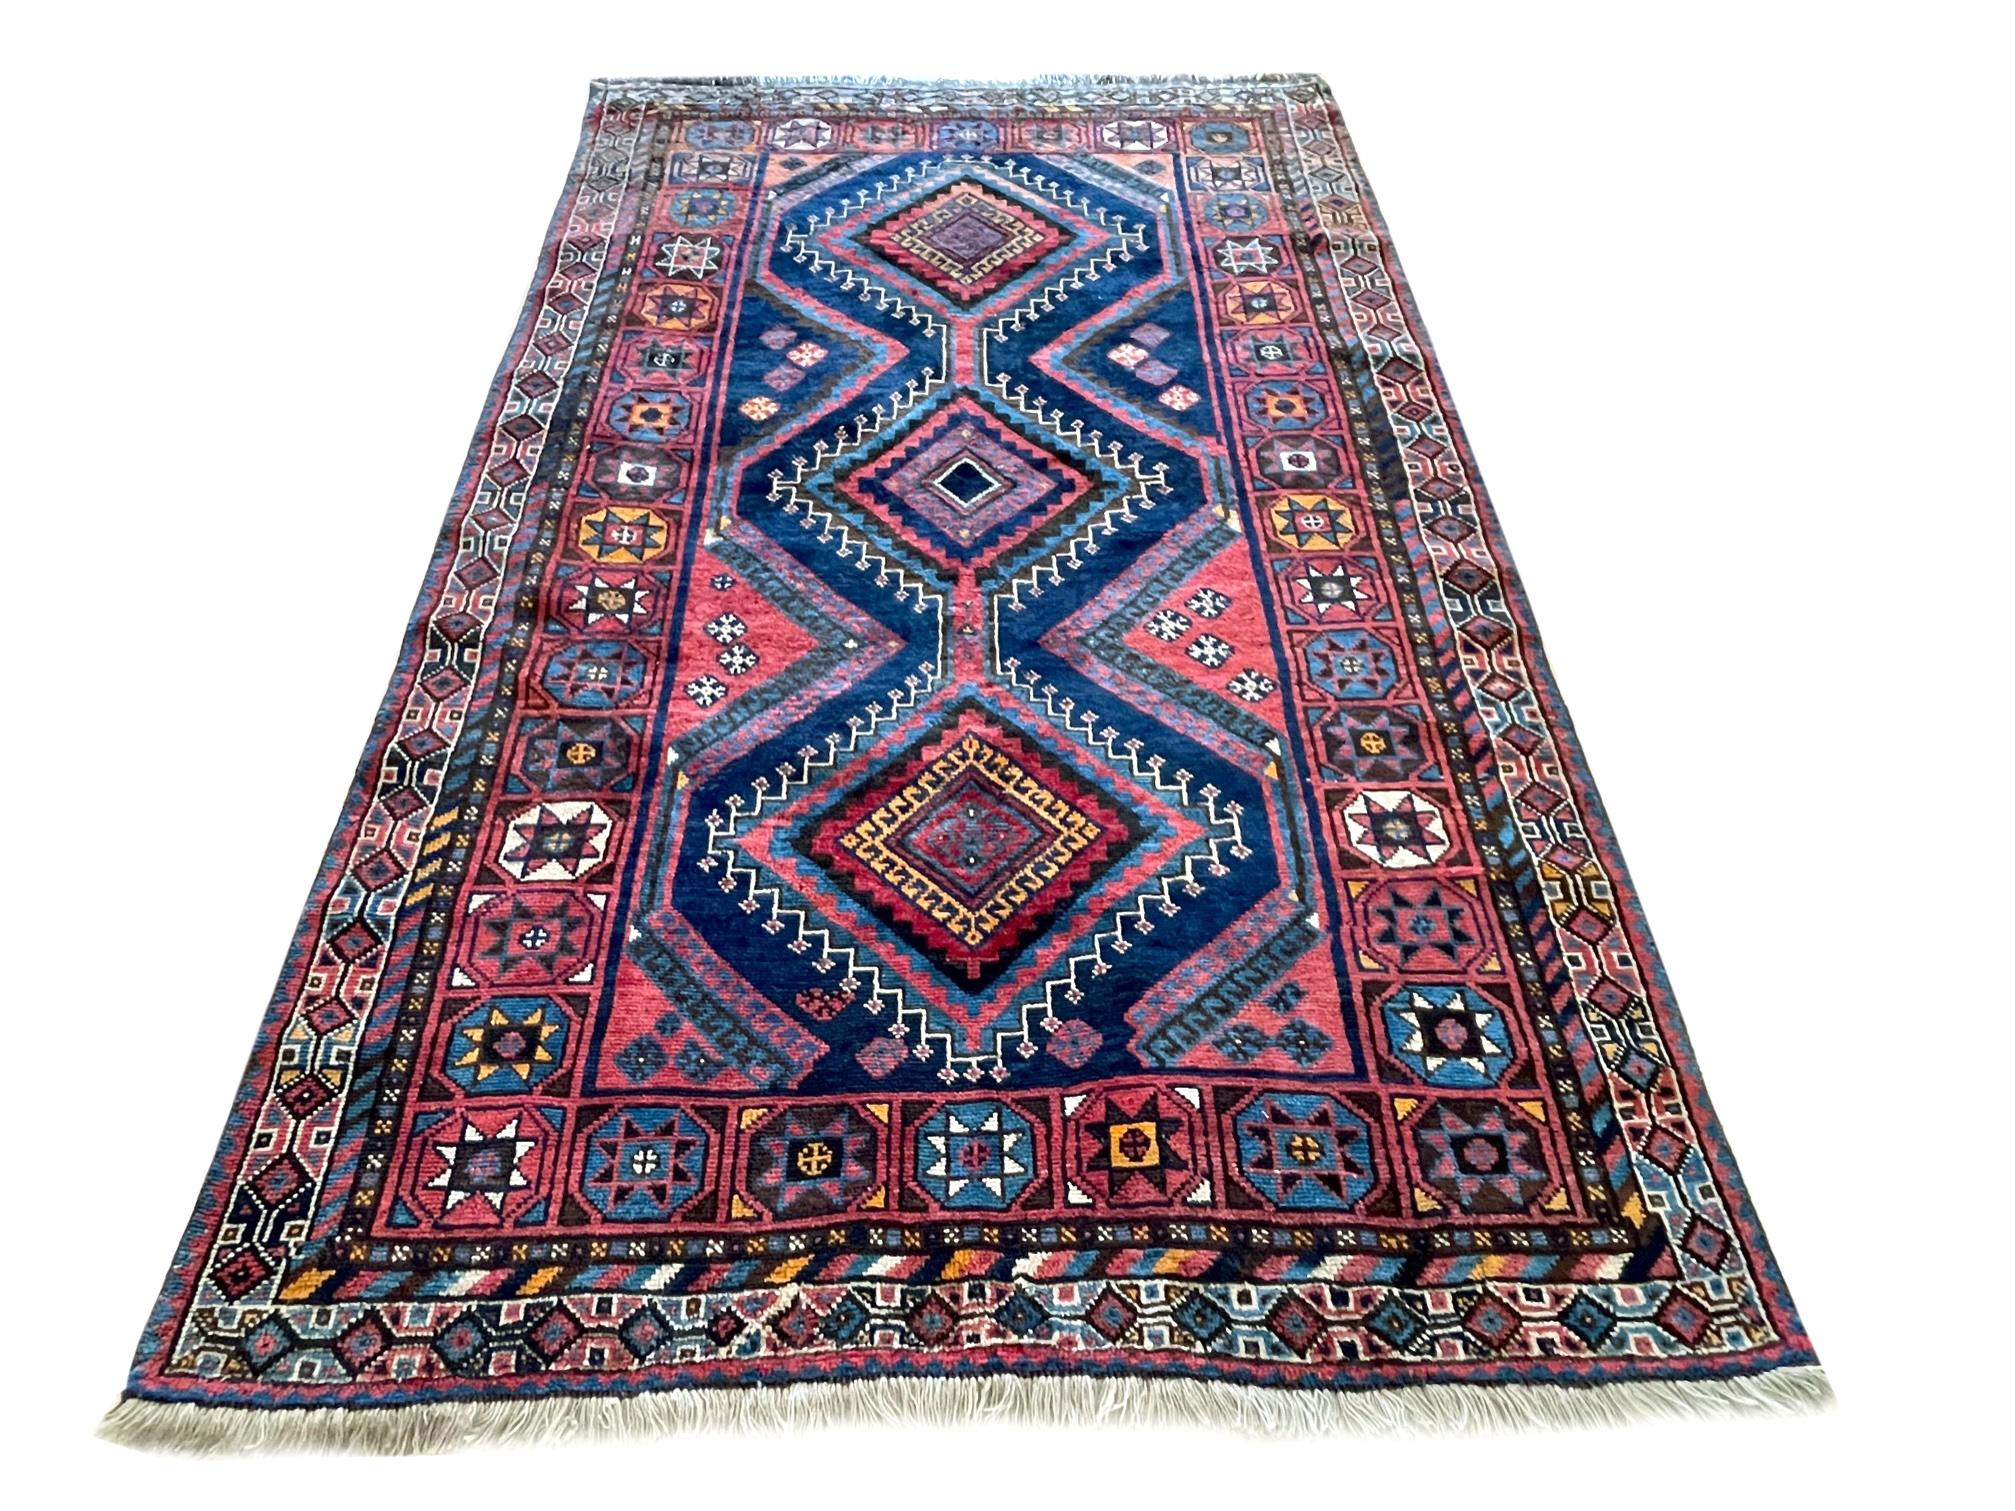 This rug is an authentic rug from Iran, Shiraz. The pile and foundation are wool. The base color is a dark blue with accents of mauve, yellow, blue and brown throughout the rug. The design is geometric with repeated diamond medallion with tribal